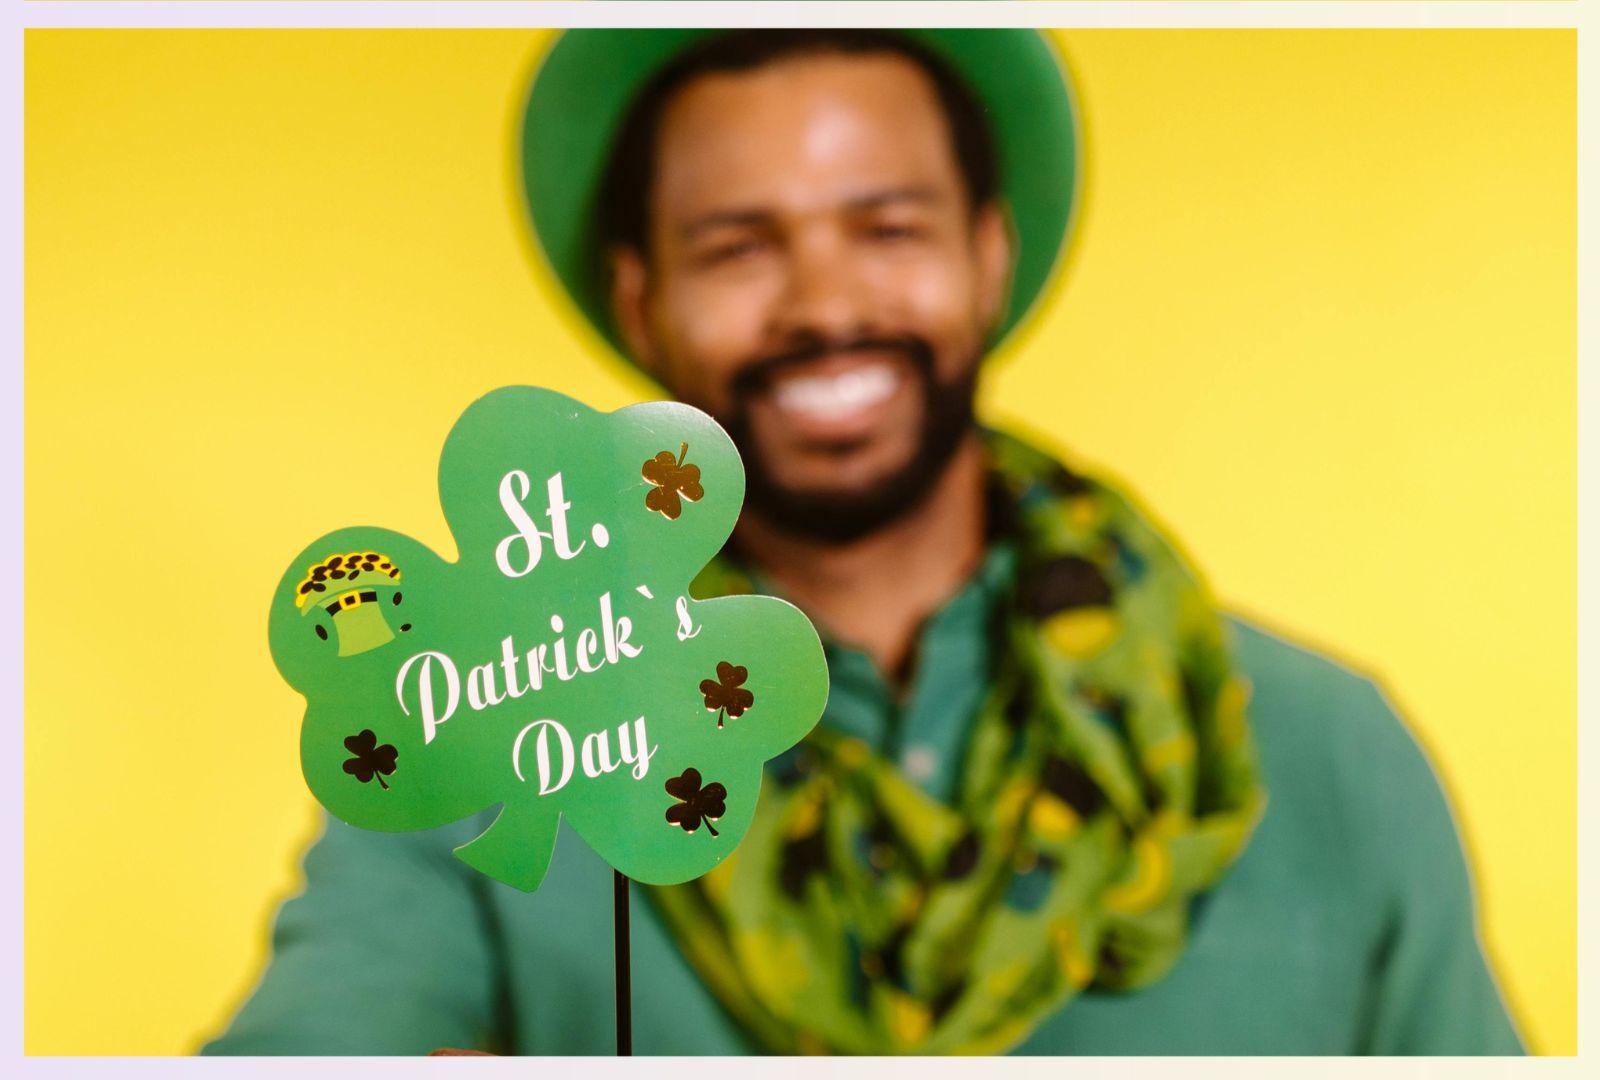 a man holding a clover shaped sign saying 'St Patricks Day'